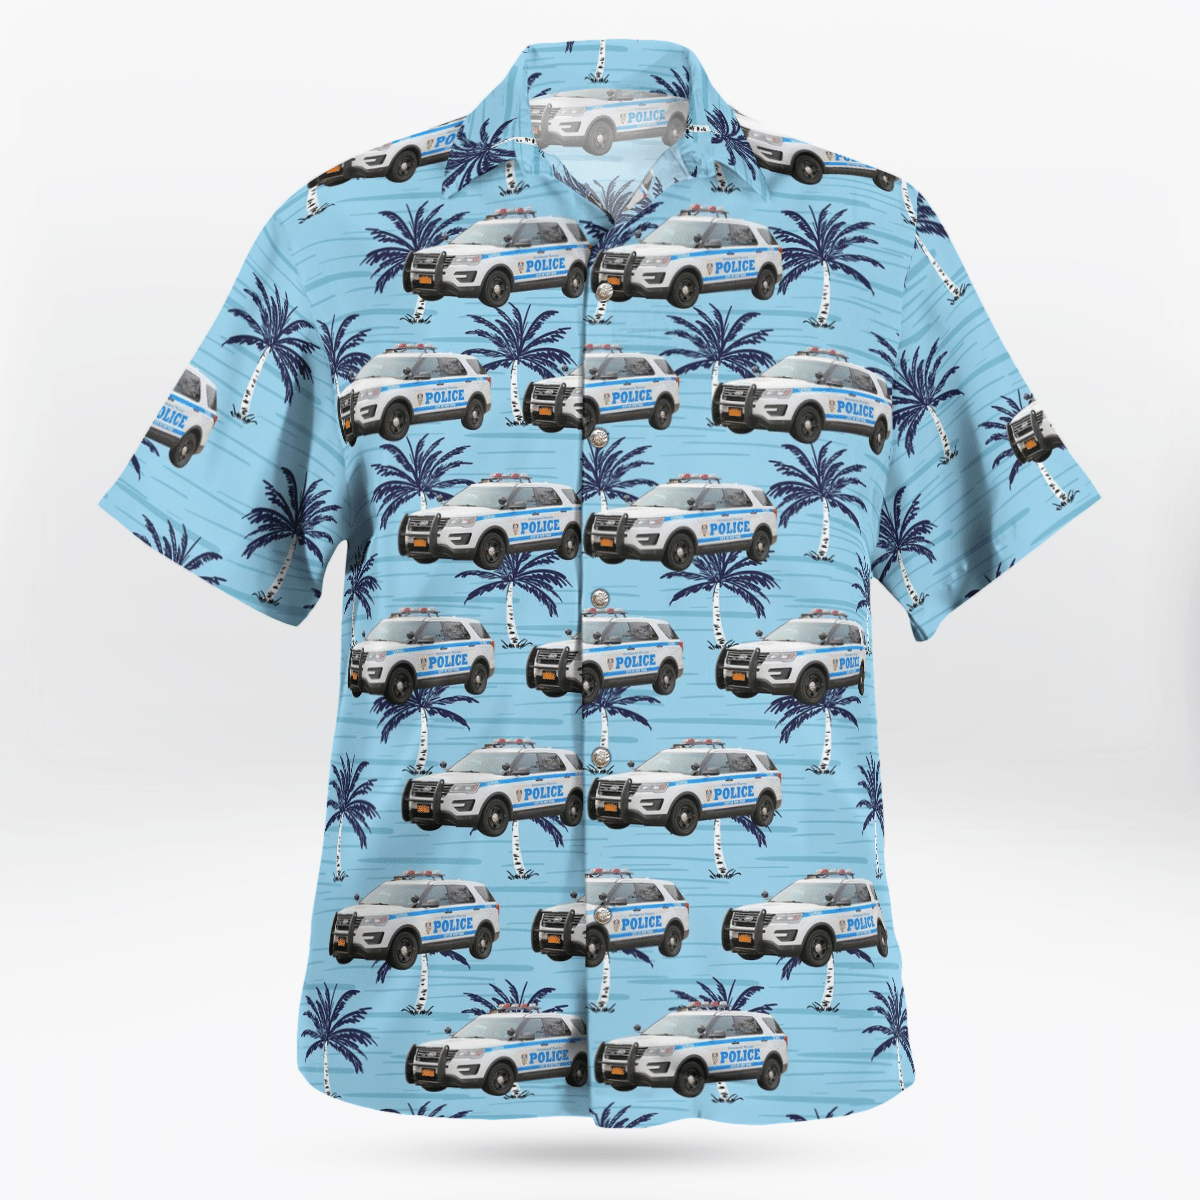 Hawaiian shirts never go out of style 183